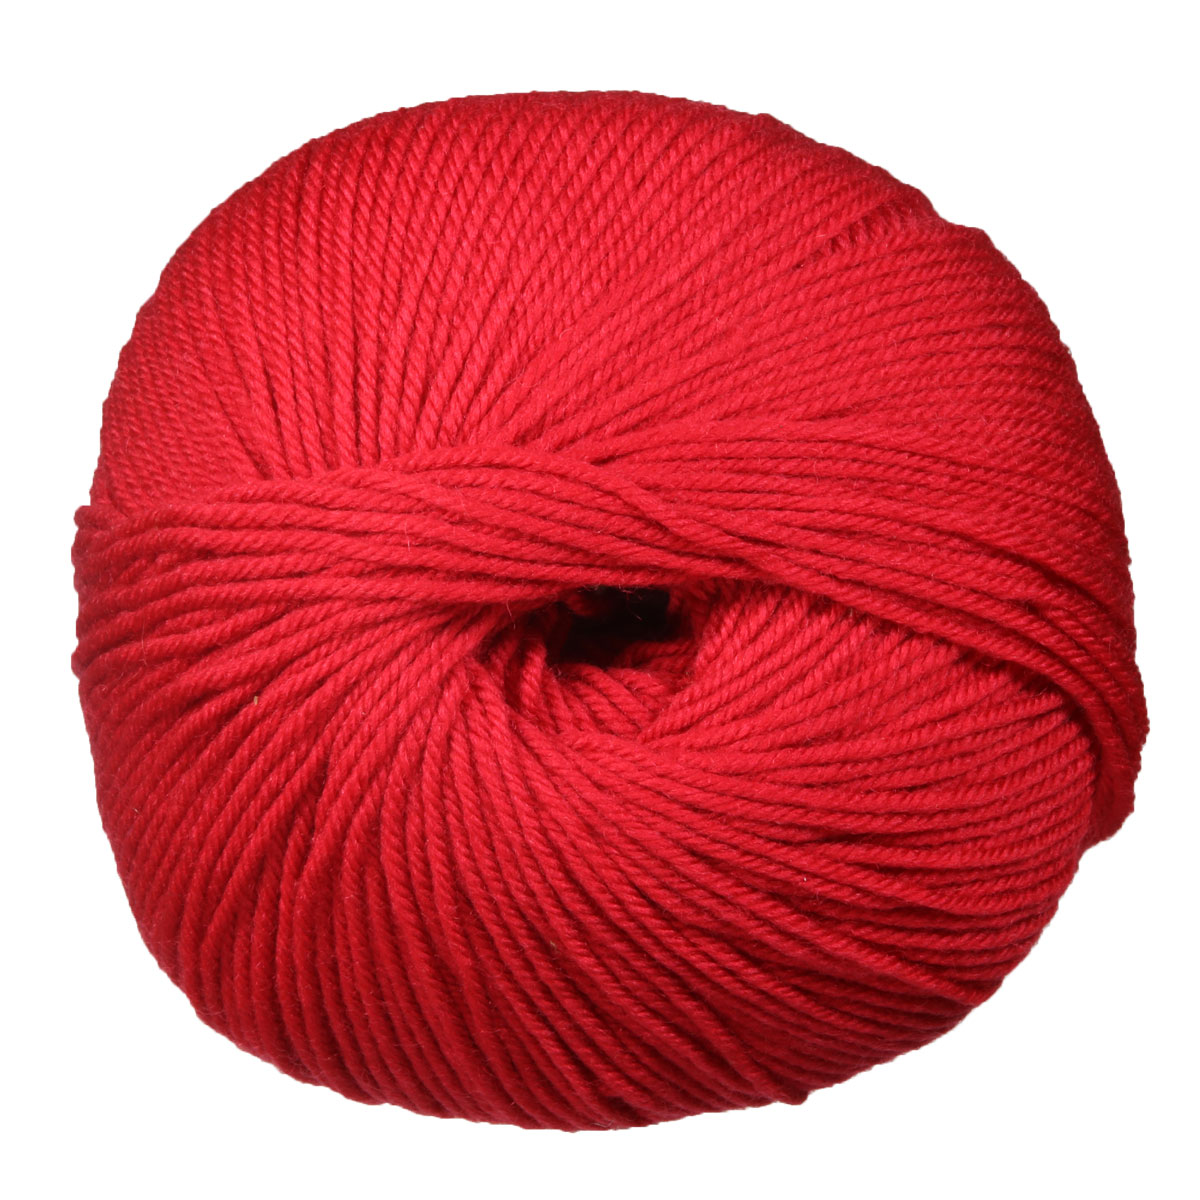 Cascade 220 Superwash Yarn - 0809 - Really Red at Jimmy Beans Wool